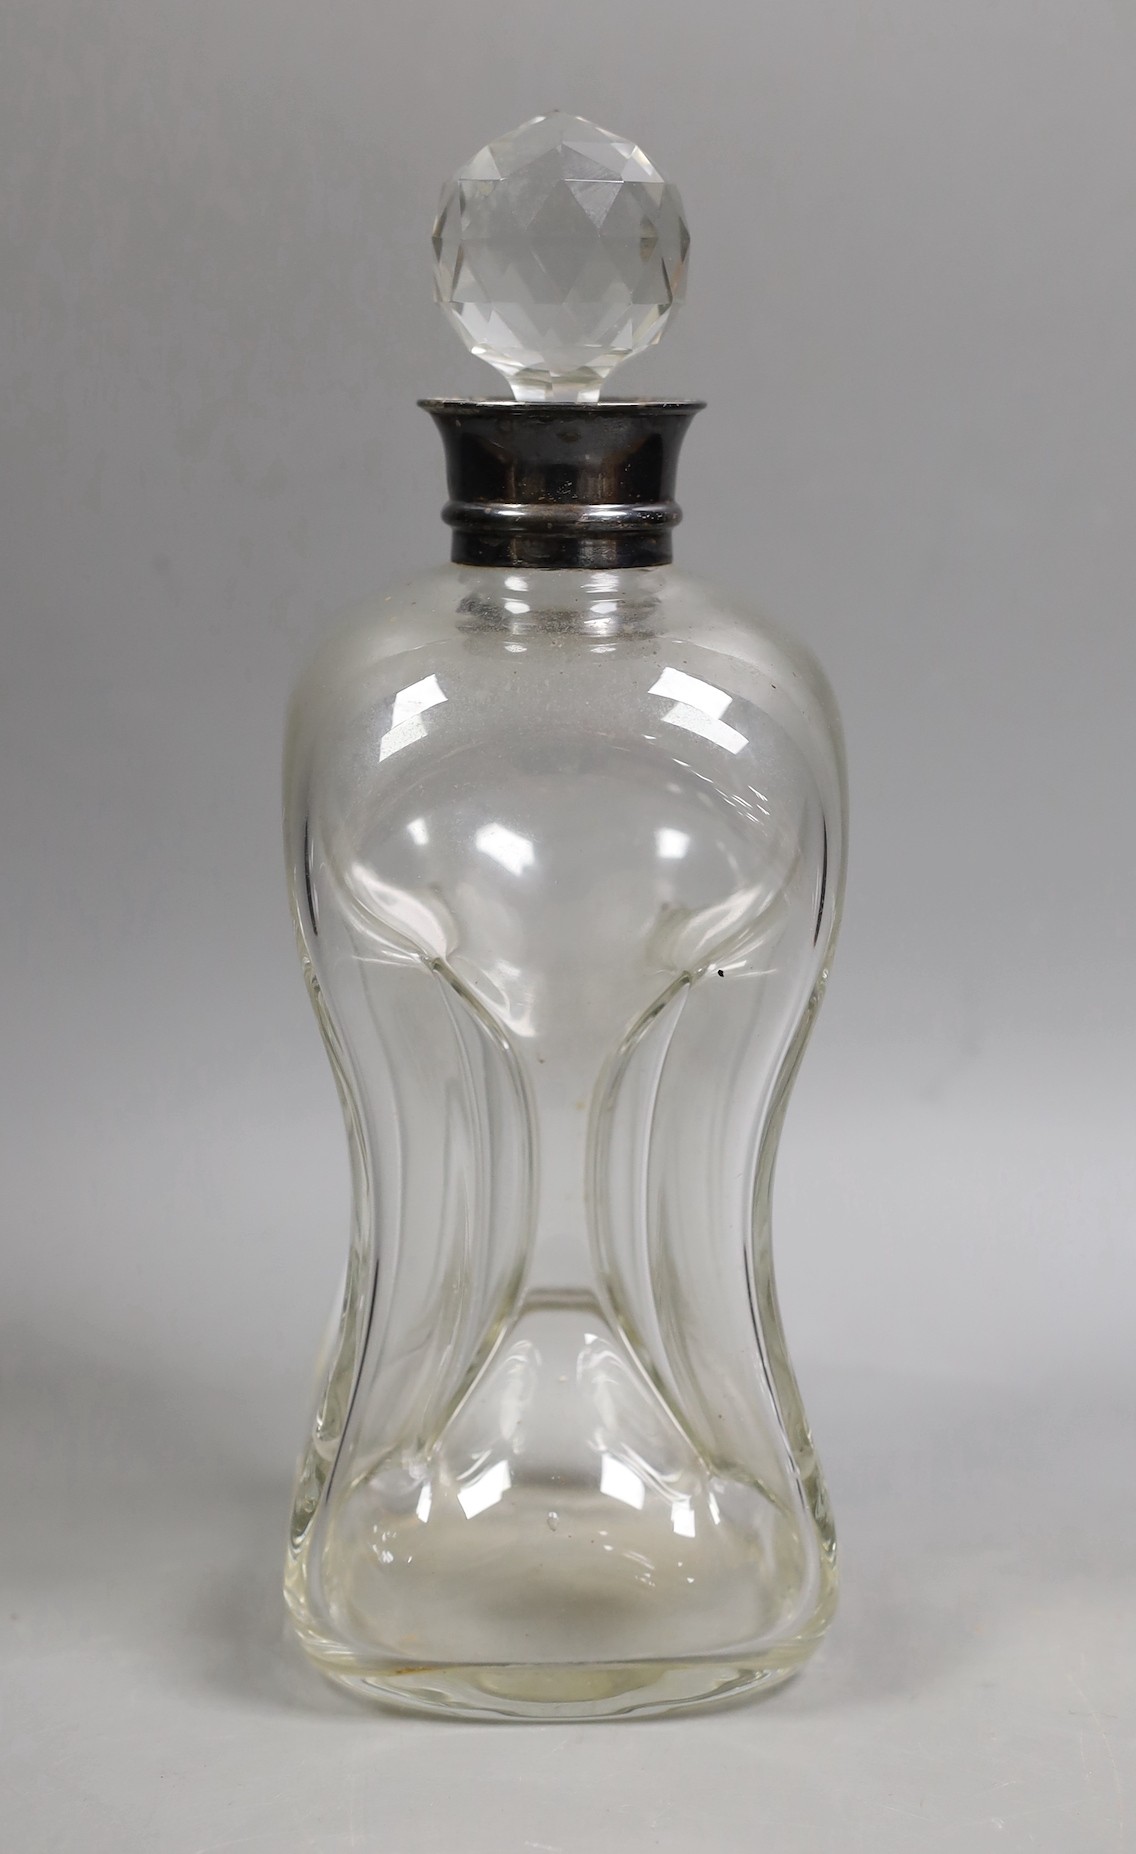 An Edwardian silver mounted waisted glass decanter and stopper, Hukin & Heath, Birmingham, 1906, height 28cm.